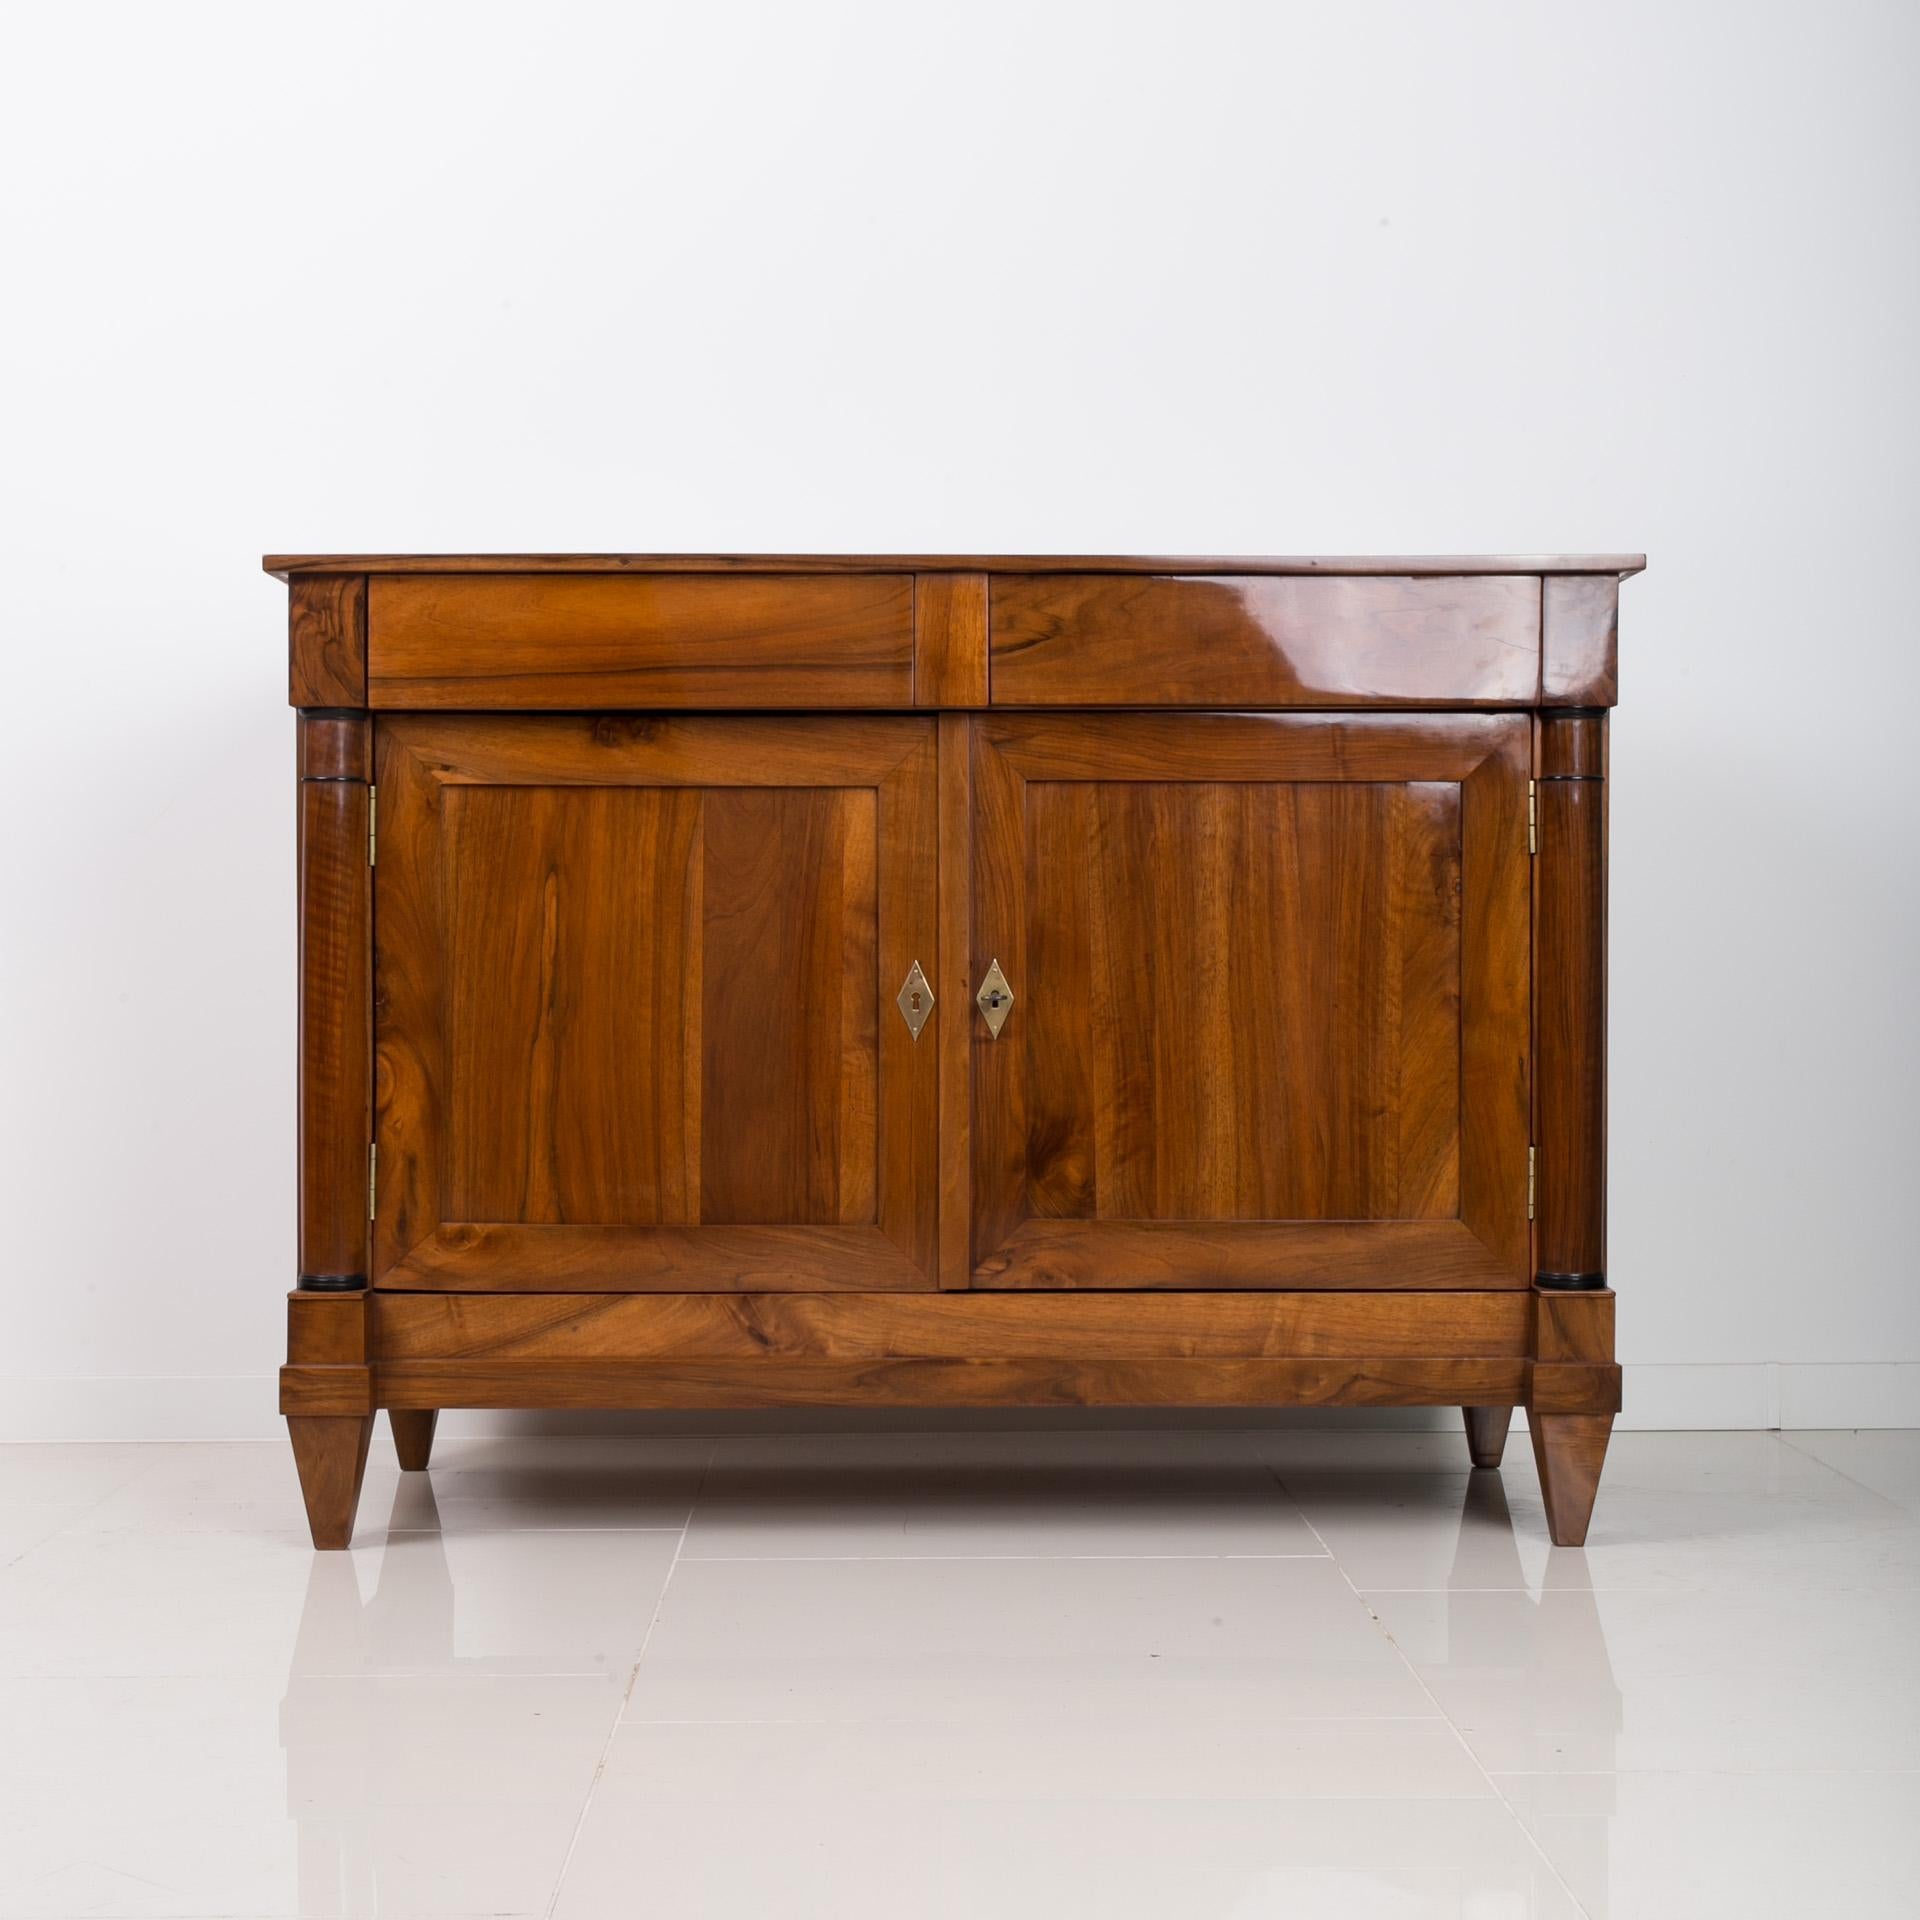 Biedermeier chest of drawers from first half of 19th century. This piece of furniture comes from France. It is made of walnut wood. It has undergone a careful renovation process in our workshop. Surface finished with polish, applied by hand with a